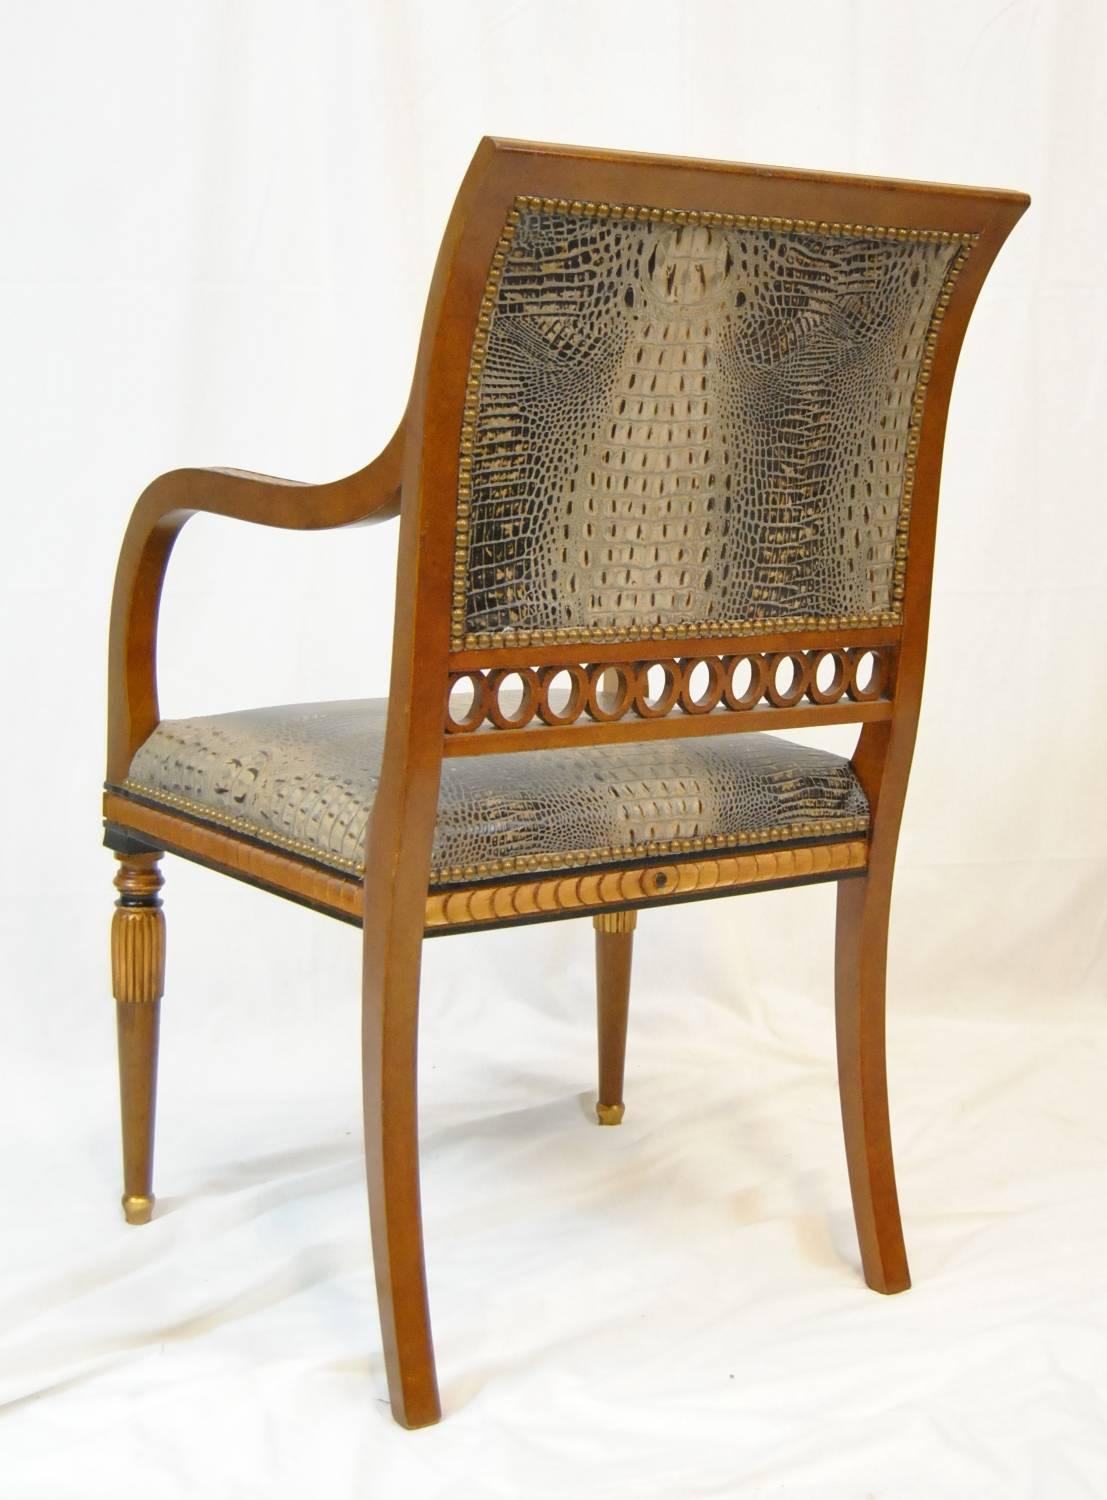 Pair of Regency Style Arm Chairs in Crocodile Upholstery by Whittemore Sherrill 1